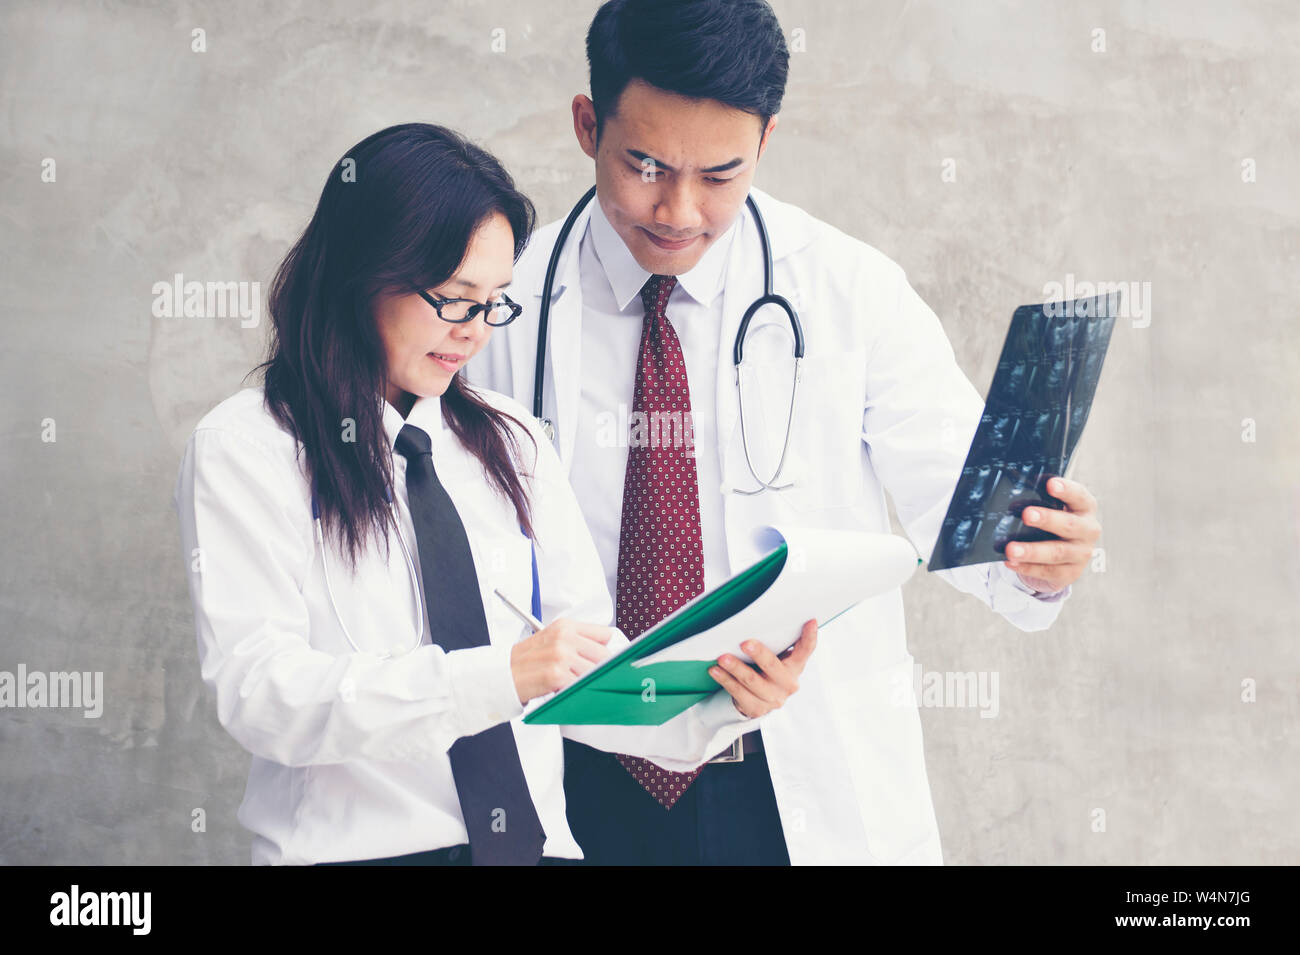 healthcare and medical concept. doctors meeting discussing on patient Chart information and X-ray Images. Stock Photo